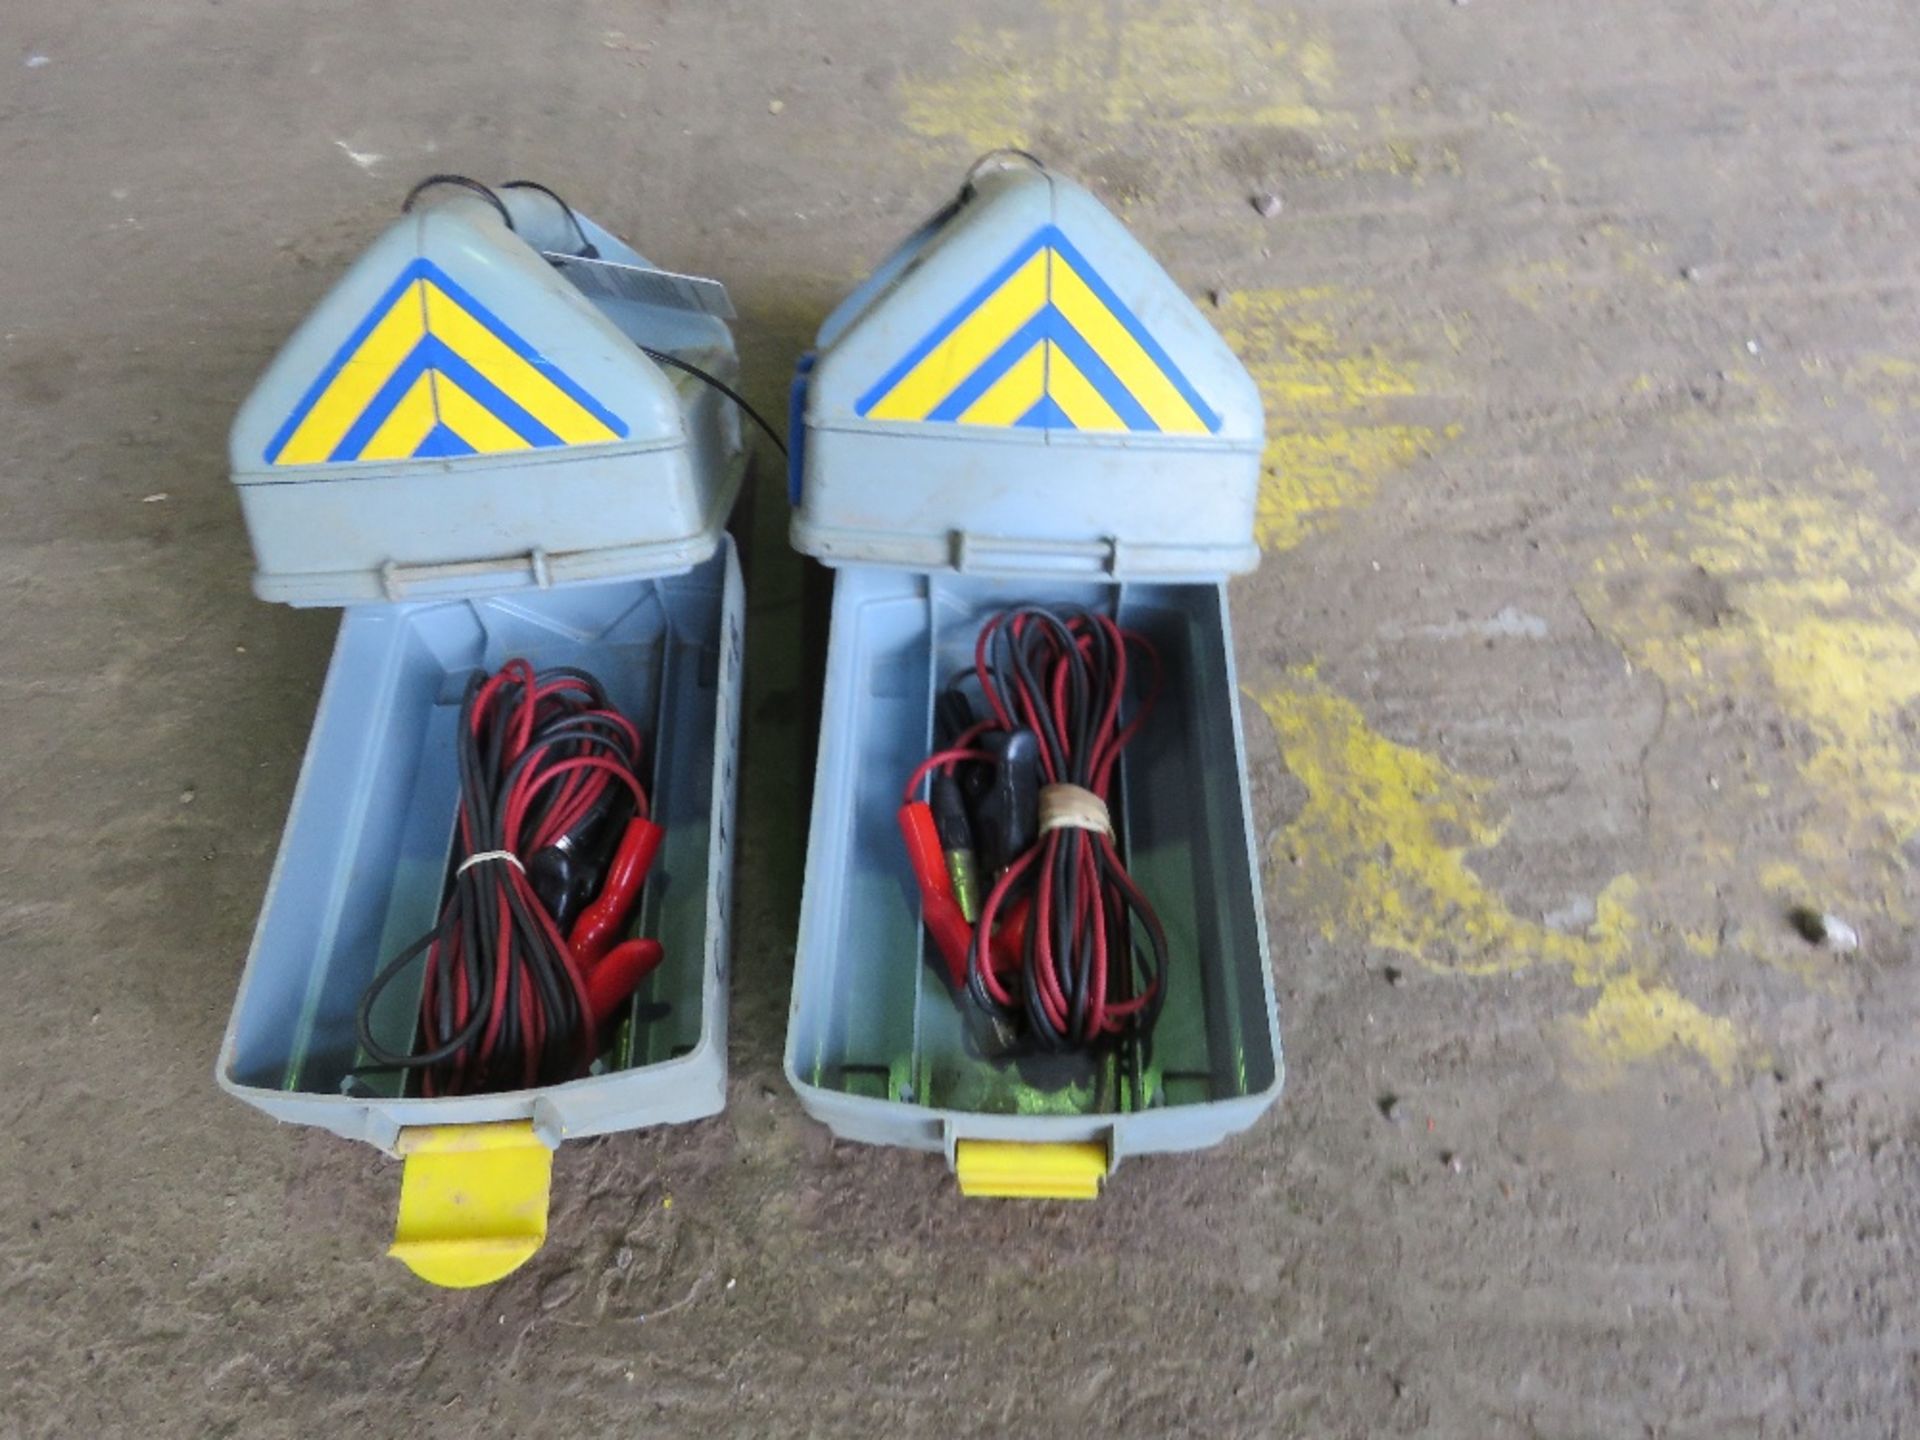 2 X GENNY 3 SIGNAL EMMITTERS. DIRECT FROM A LOCAL GROUNDWORKS COMPANY AS PART OF THEIR RESTRUCTUR - Image 2 of 3